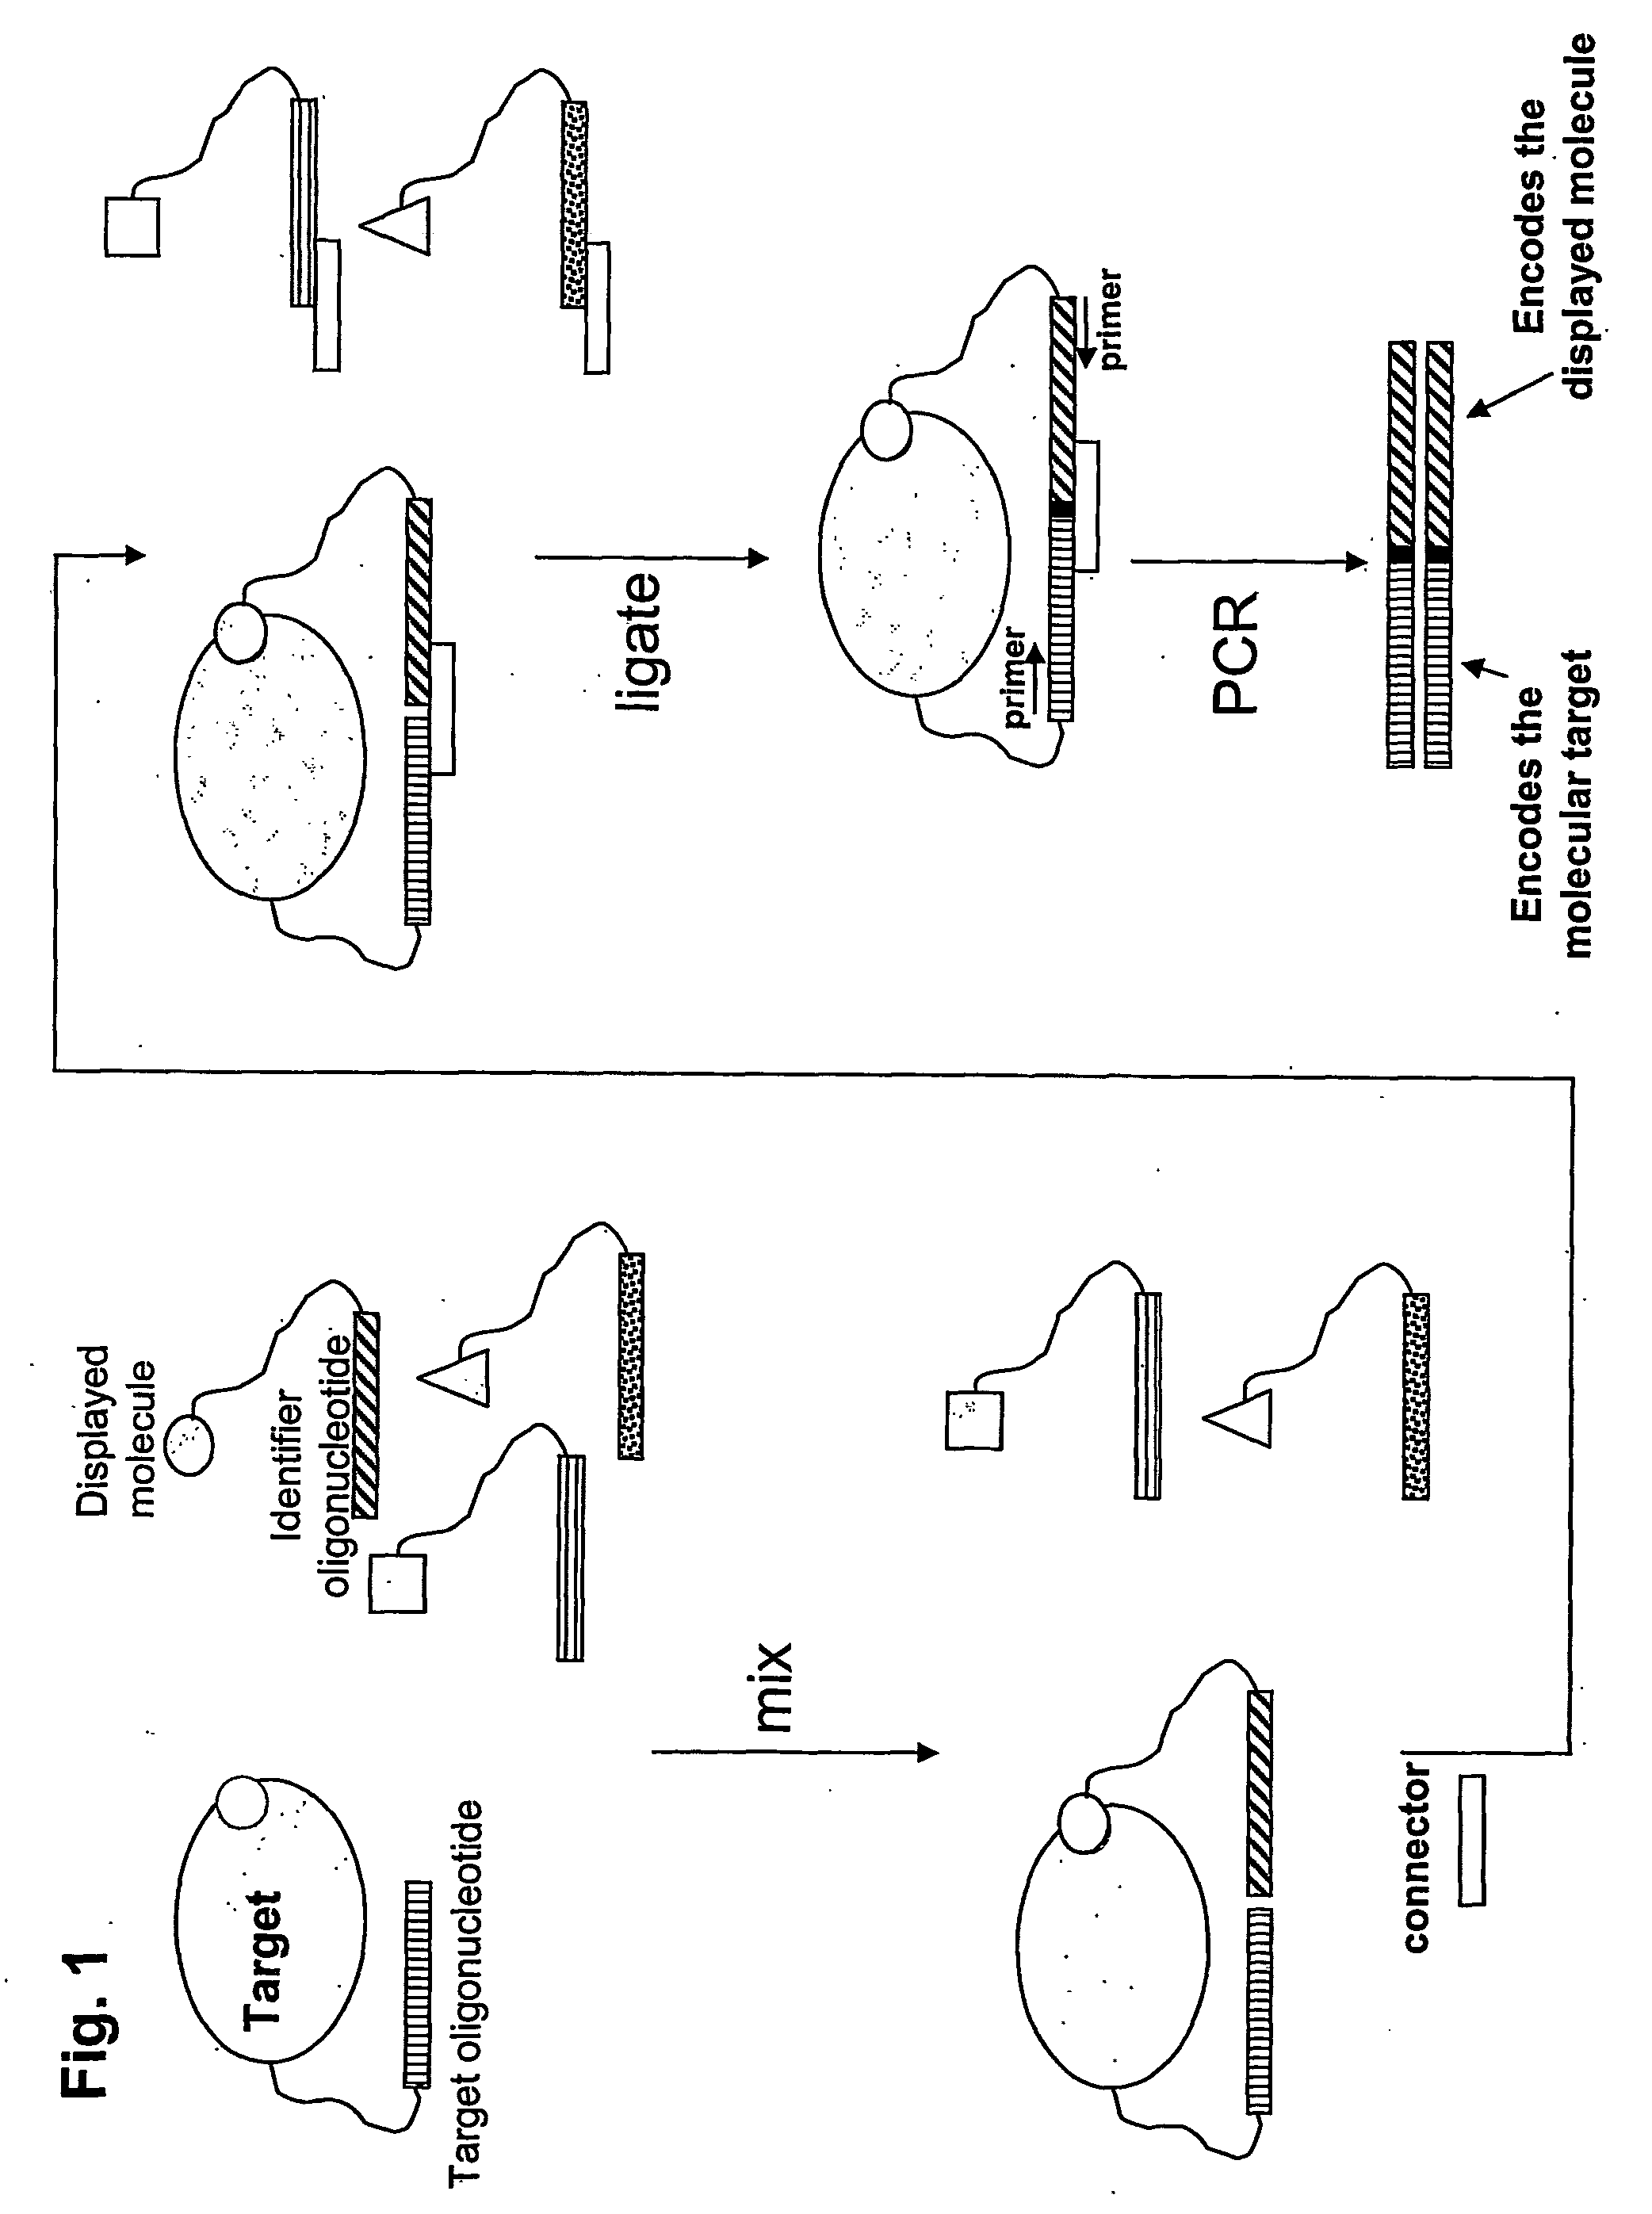 Method for Obtaining Structural Information Concerning an Encoded Molecule and Method for Selecting Compounds